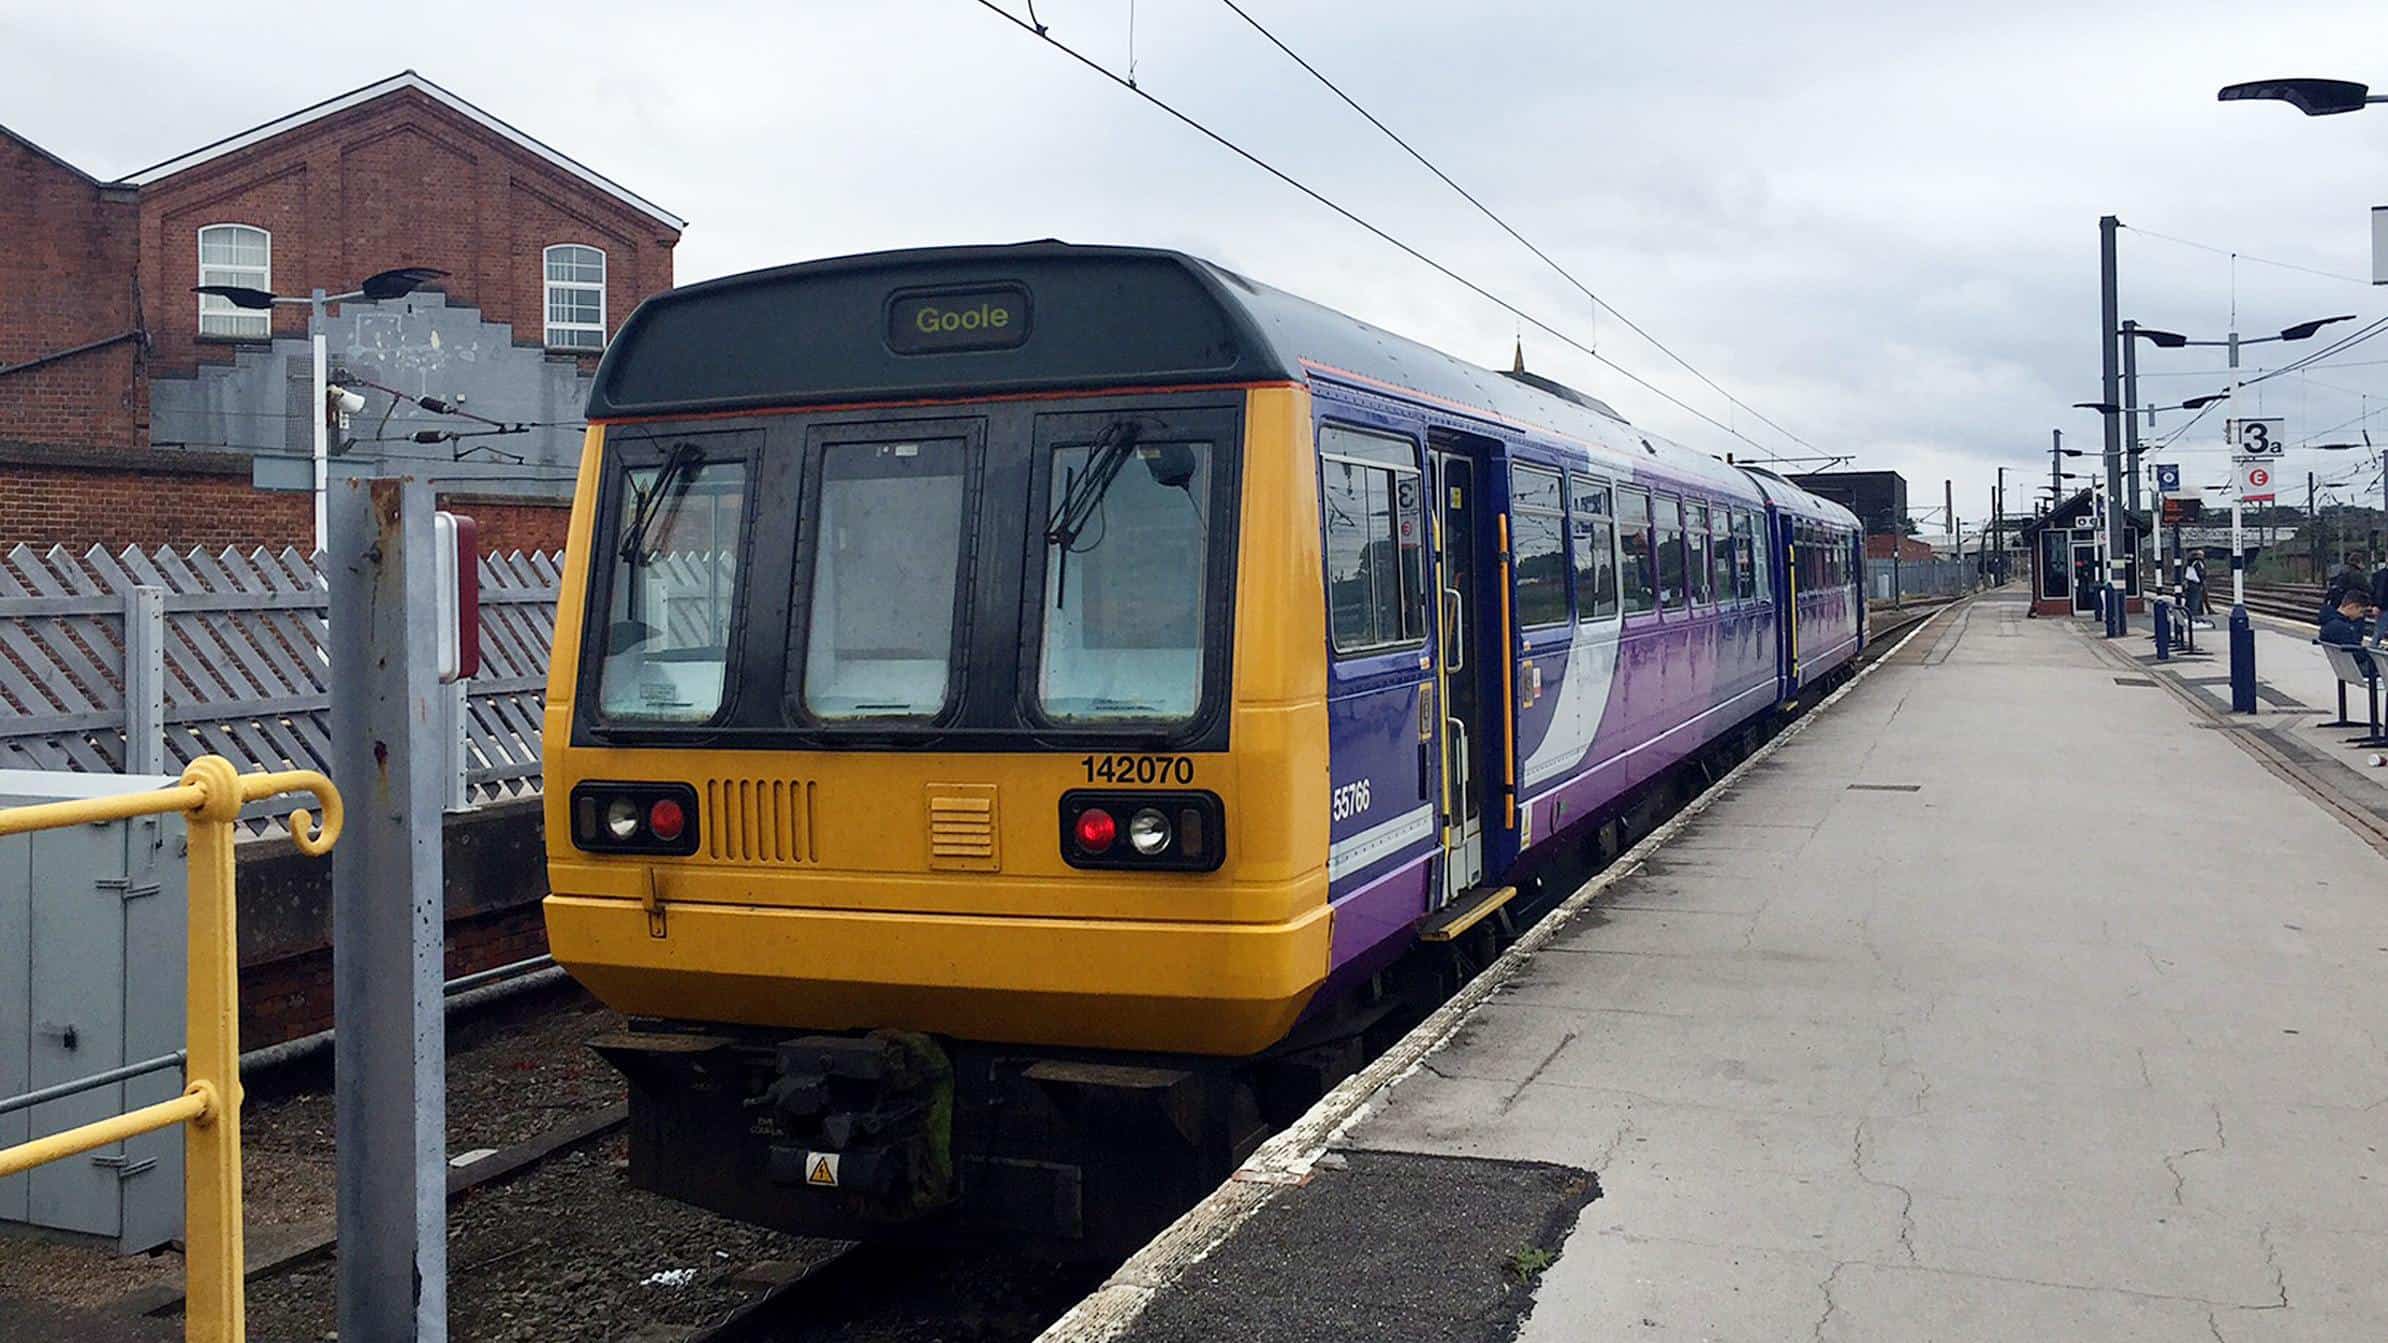 Pacer trains demonstrate how neglected the north really is by Westminster